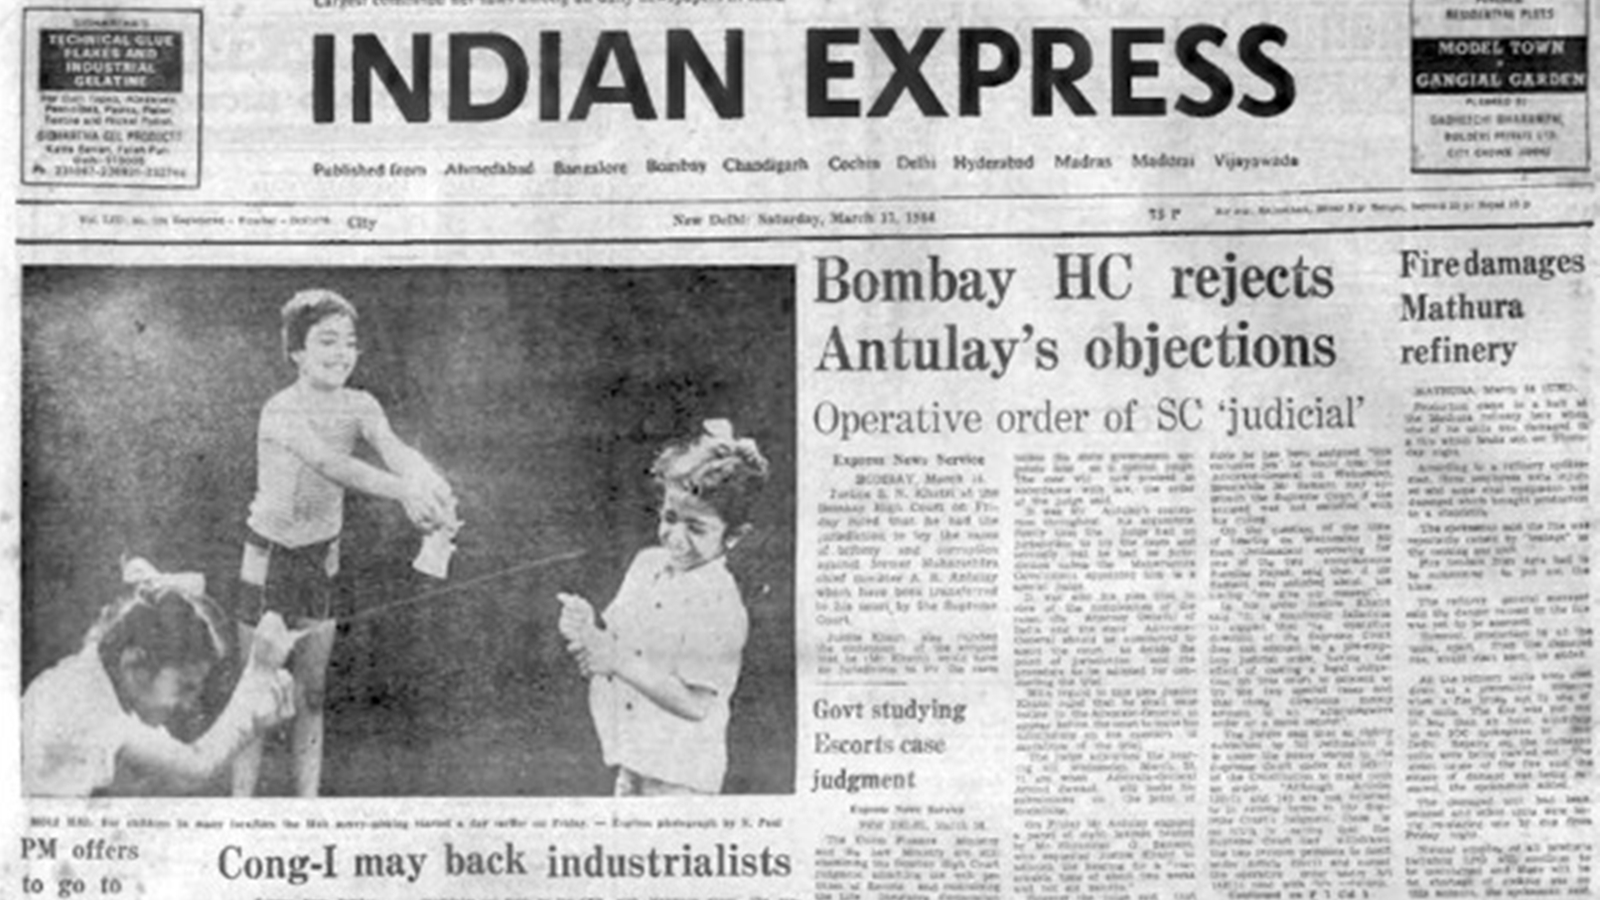 Justice S N Khatri, Bombay HC jurisdiction, A R Antulay bribery corruption cases, Supreme Court, Mathura refinery fire, Indira Gandhi, Iran President Ali Khamenei, Enforcement Directorate, Foreign Exchange Regulation, forty years ago, indian express old news, indian express news